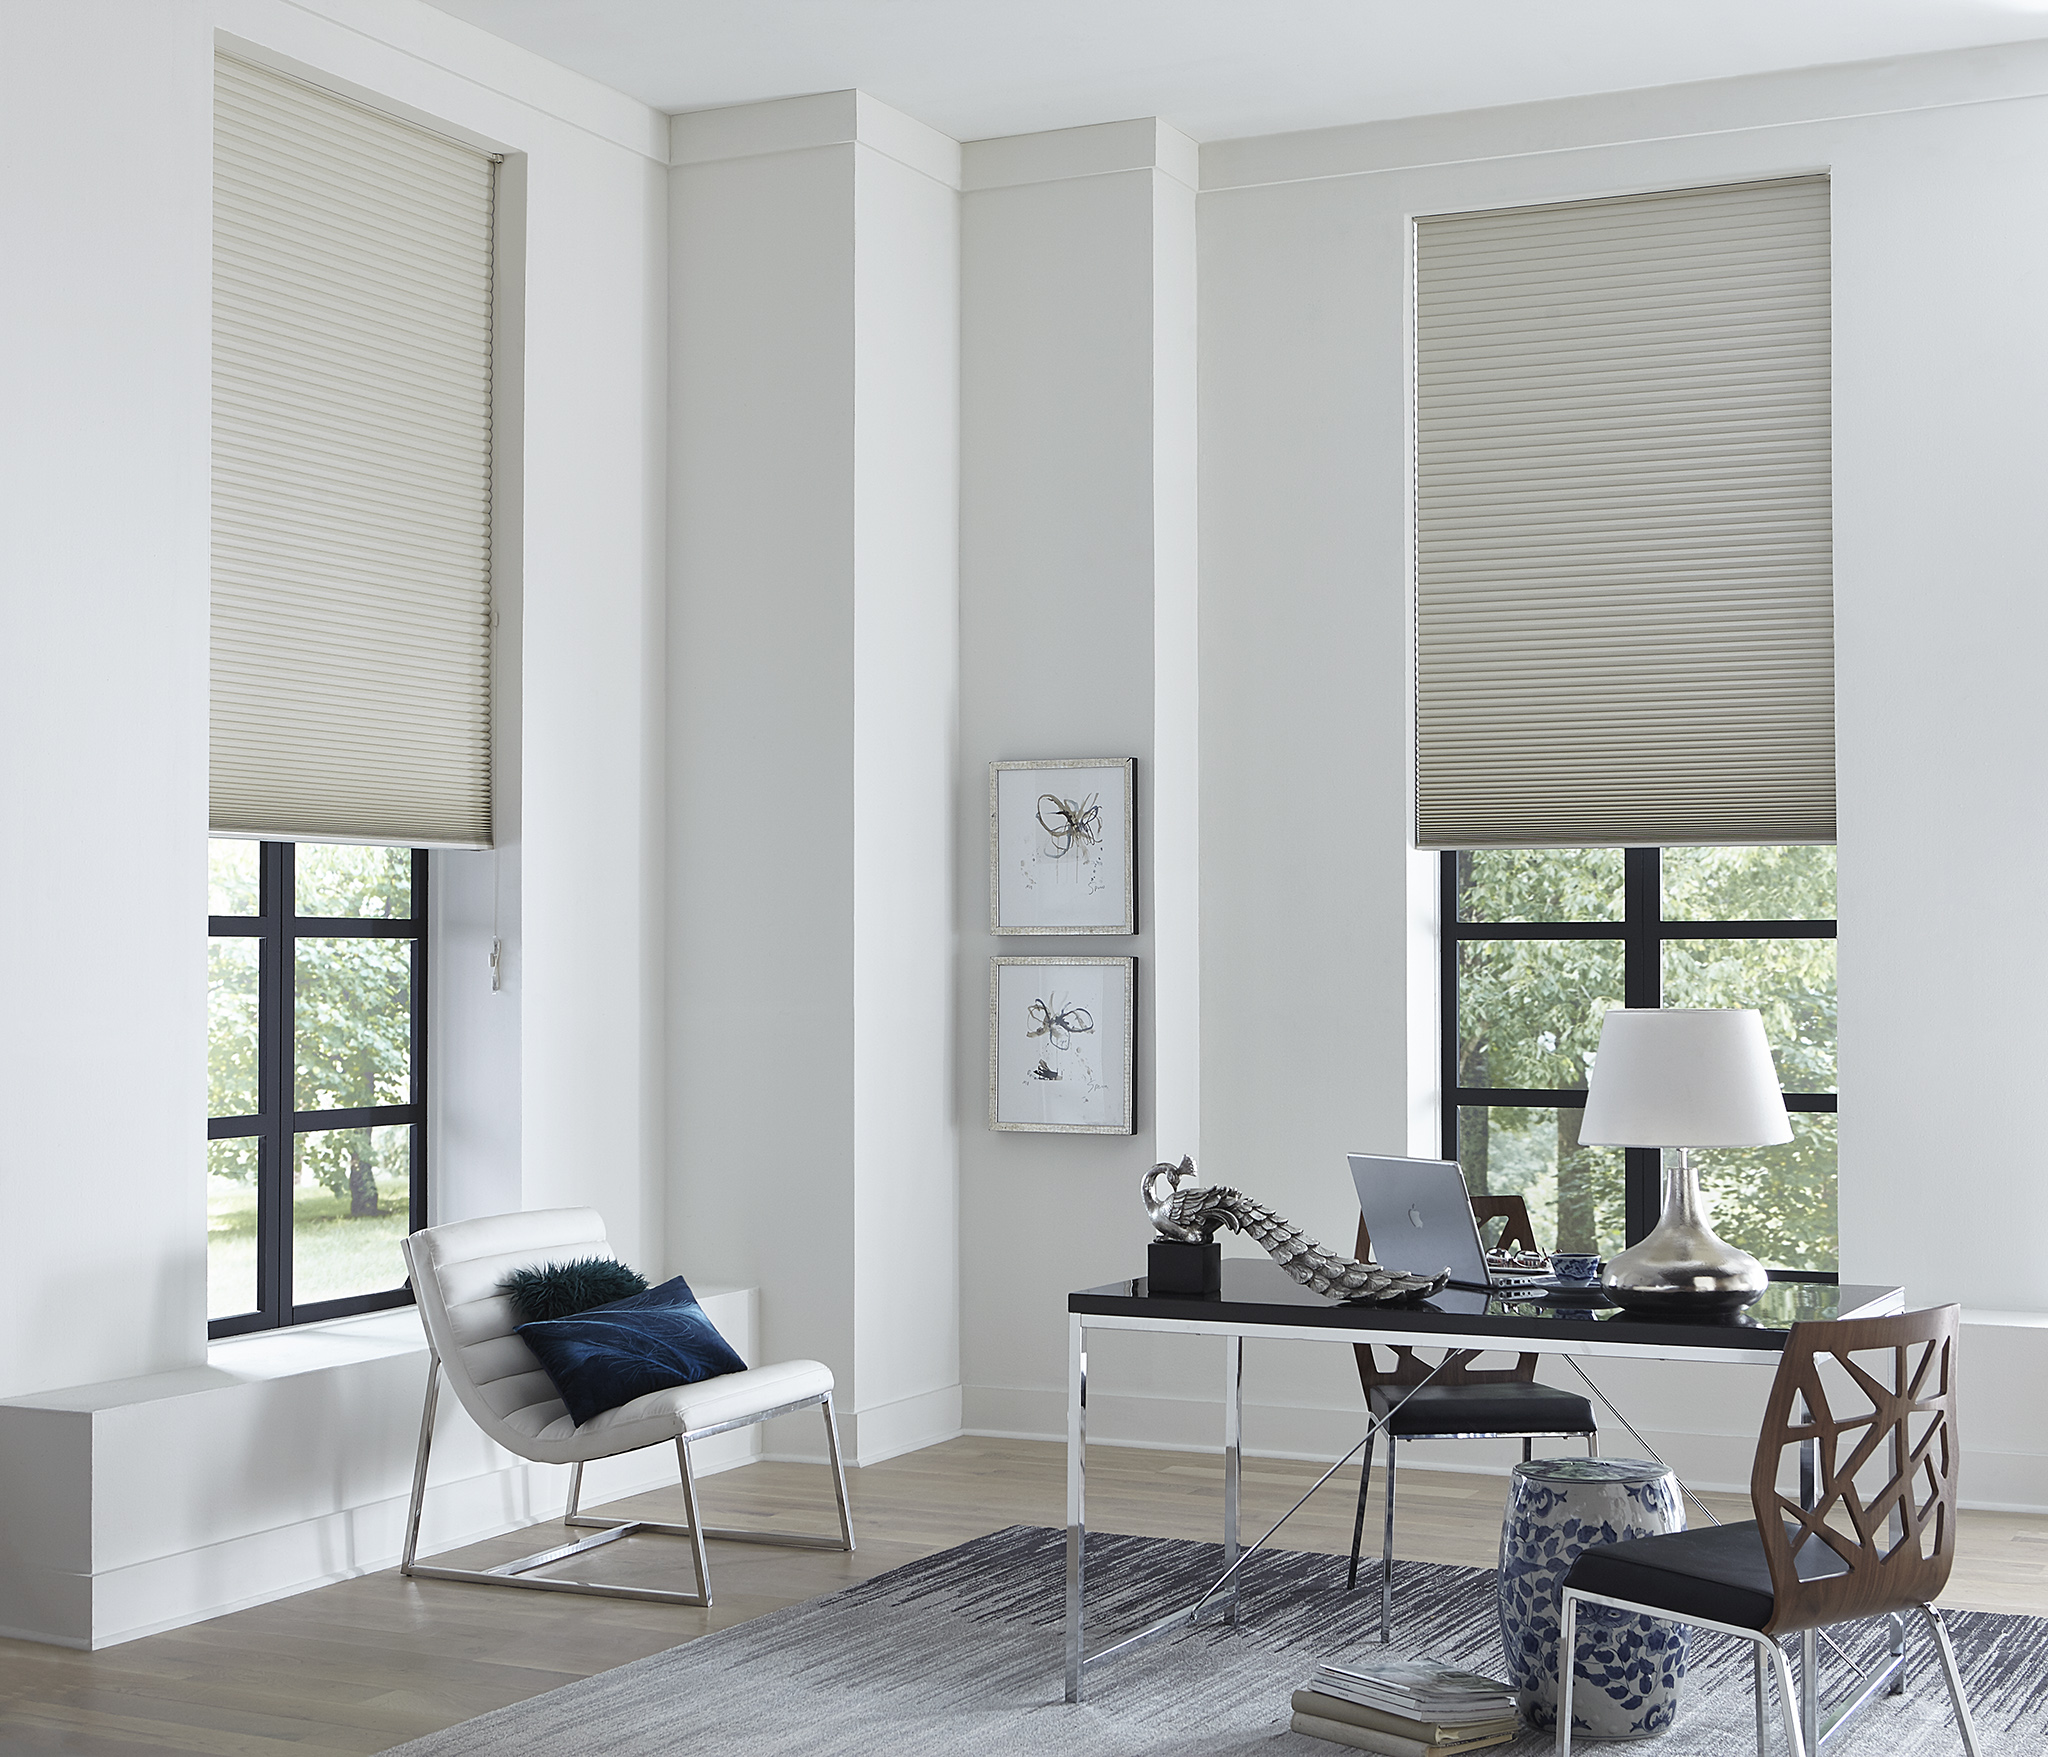 Blackout Blinds offer Perfect Shade of Night – TopsDecor.com